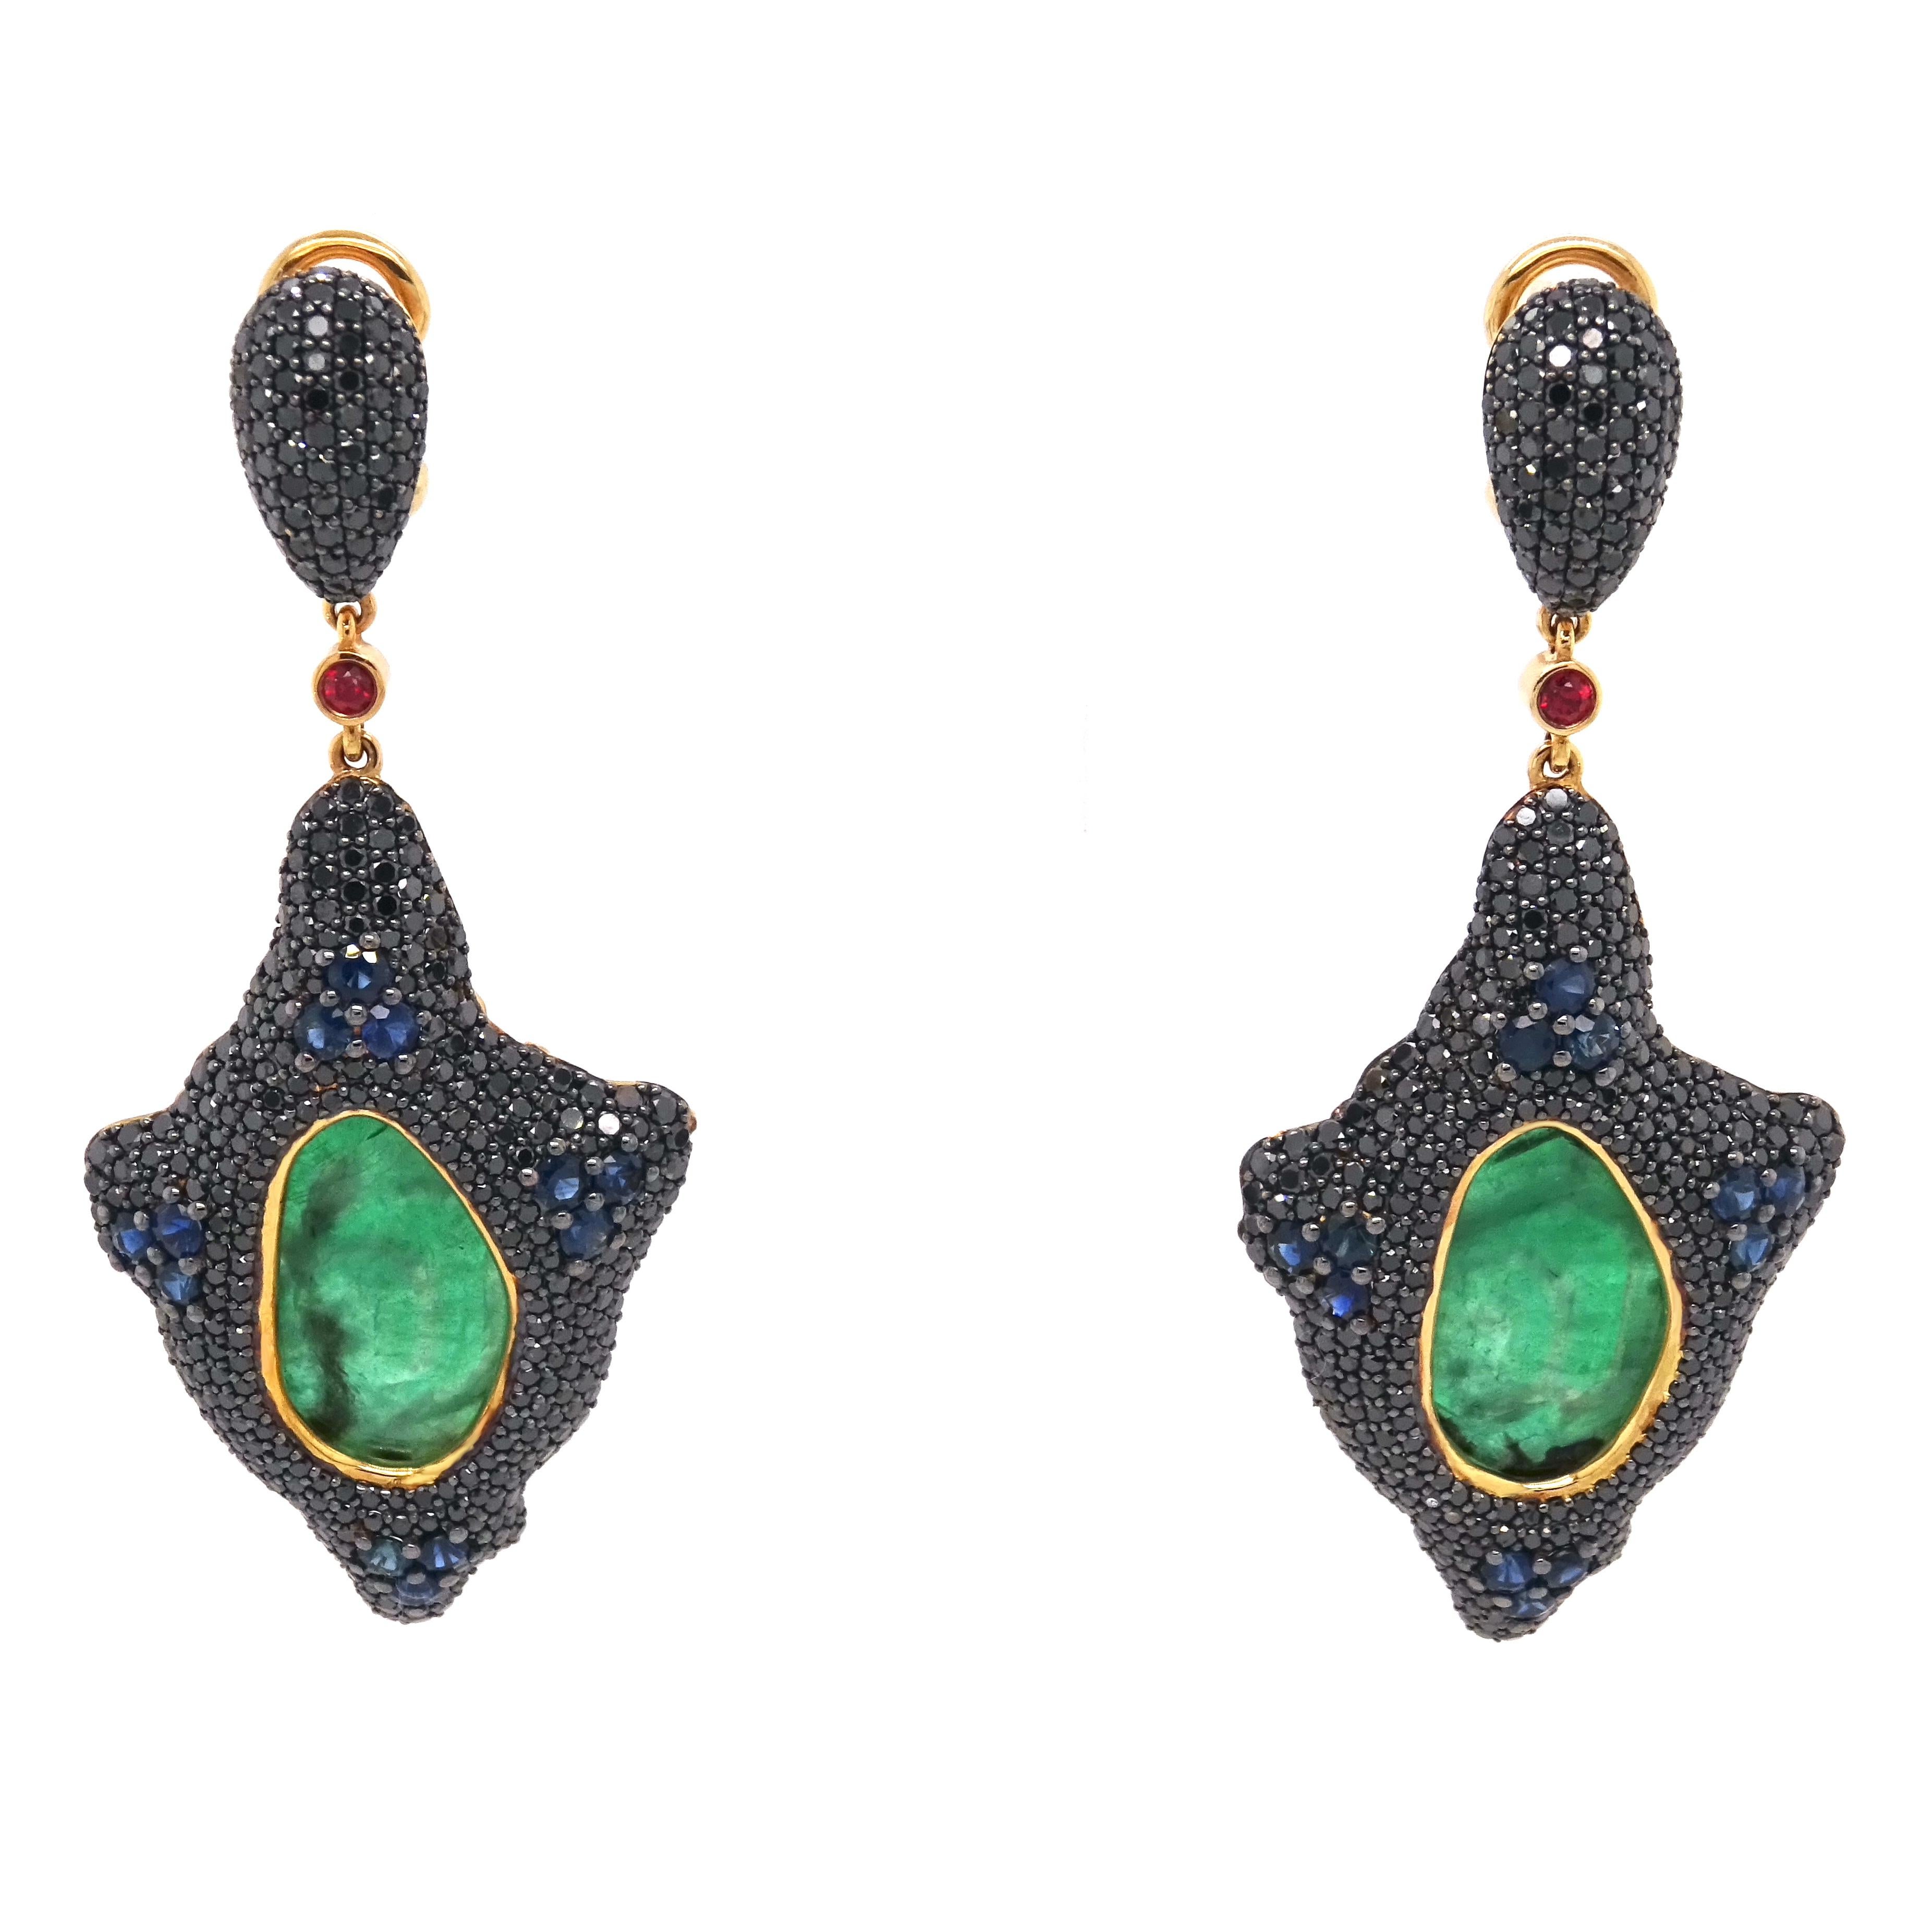 Pure Venom Collection by VOTIVE.

Step into the alluring world of VOTIVE's Pure Venom Collection, where elegance meets danger in these majestic Stingray Earrings. At the heart of these captivating earrings lie two vivid emeralds, exuding a vibrant